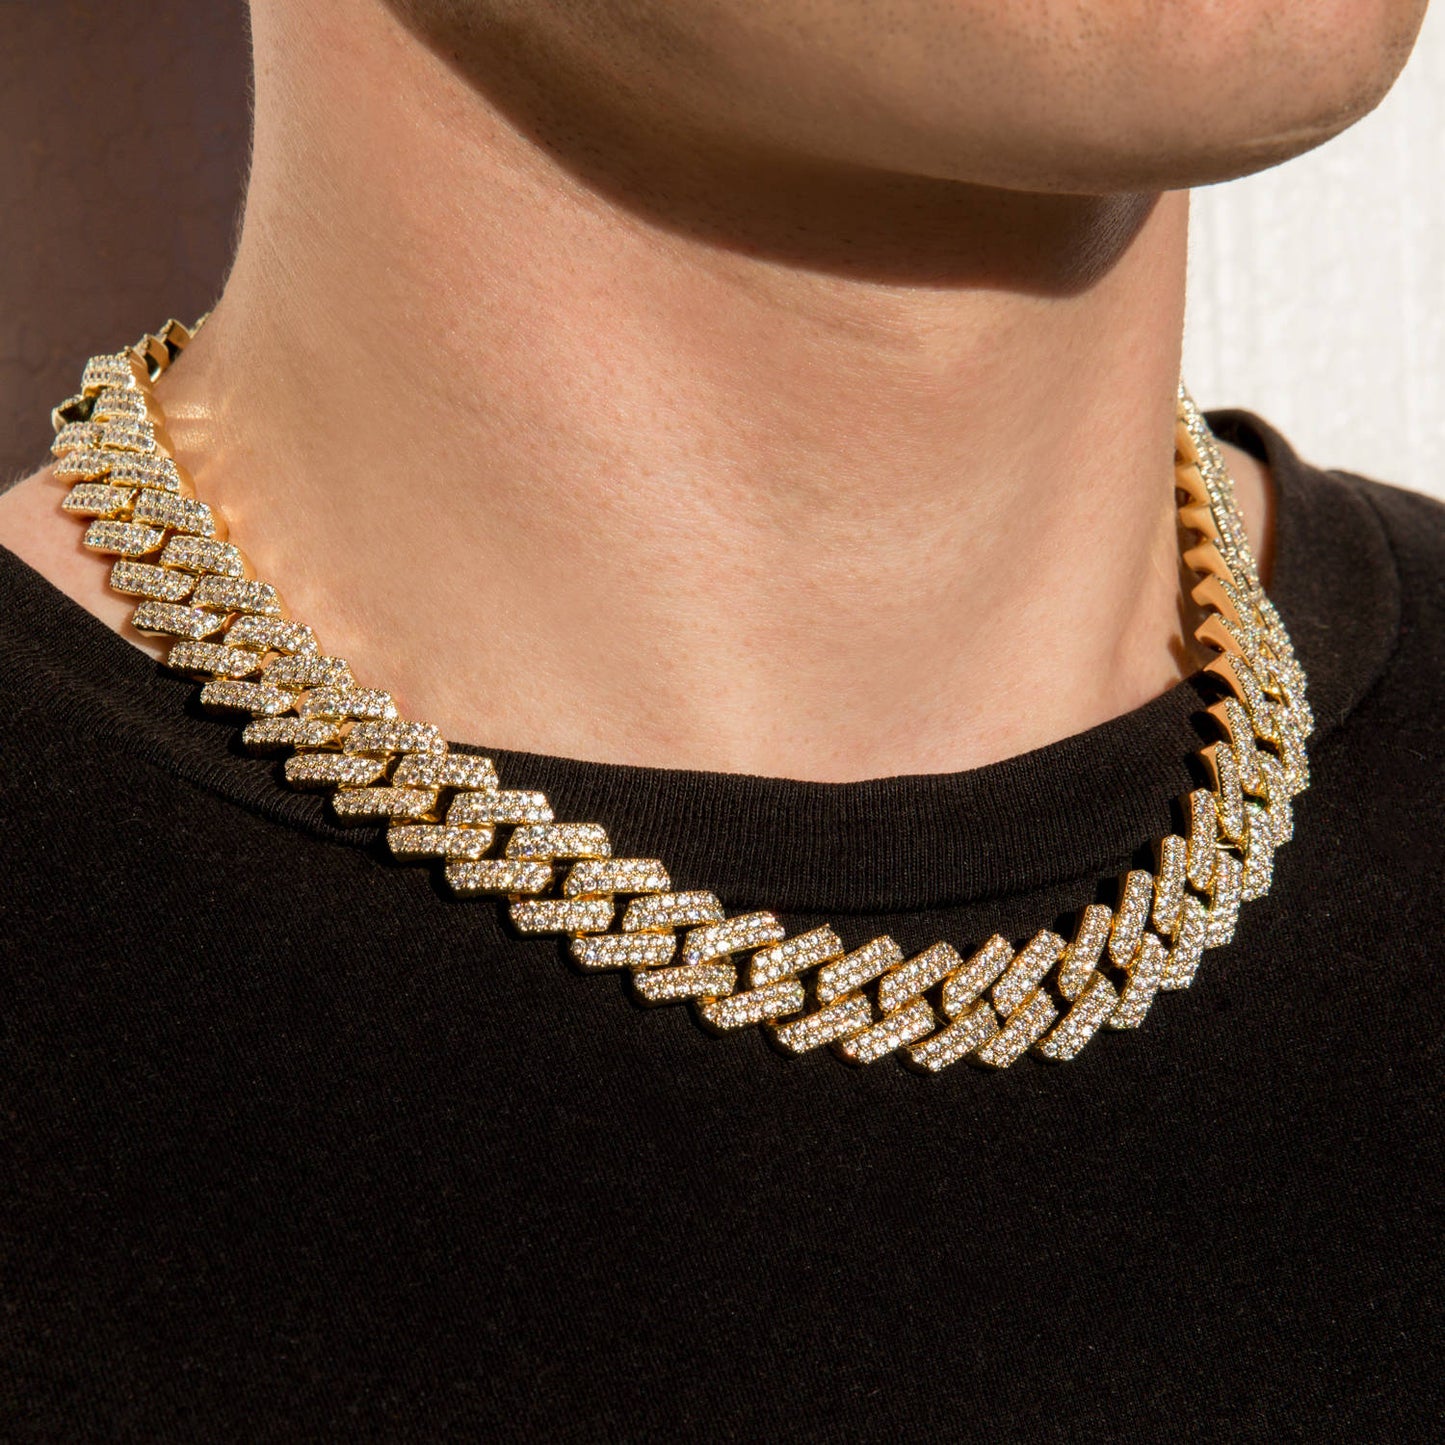 MIAMI CUBAN ICED LINK CHAIN (15MM)